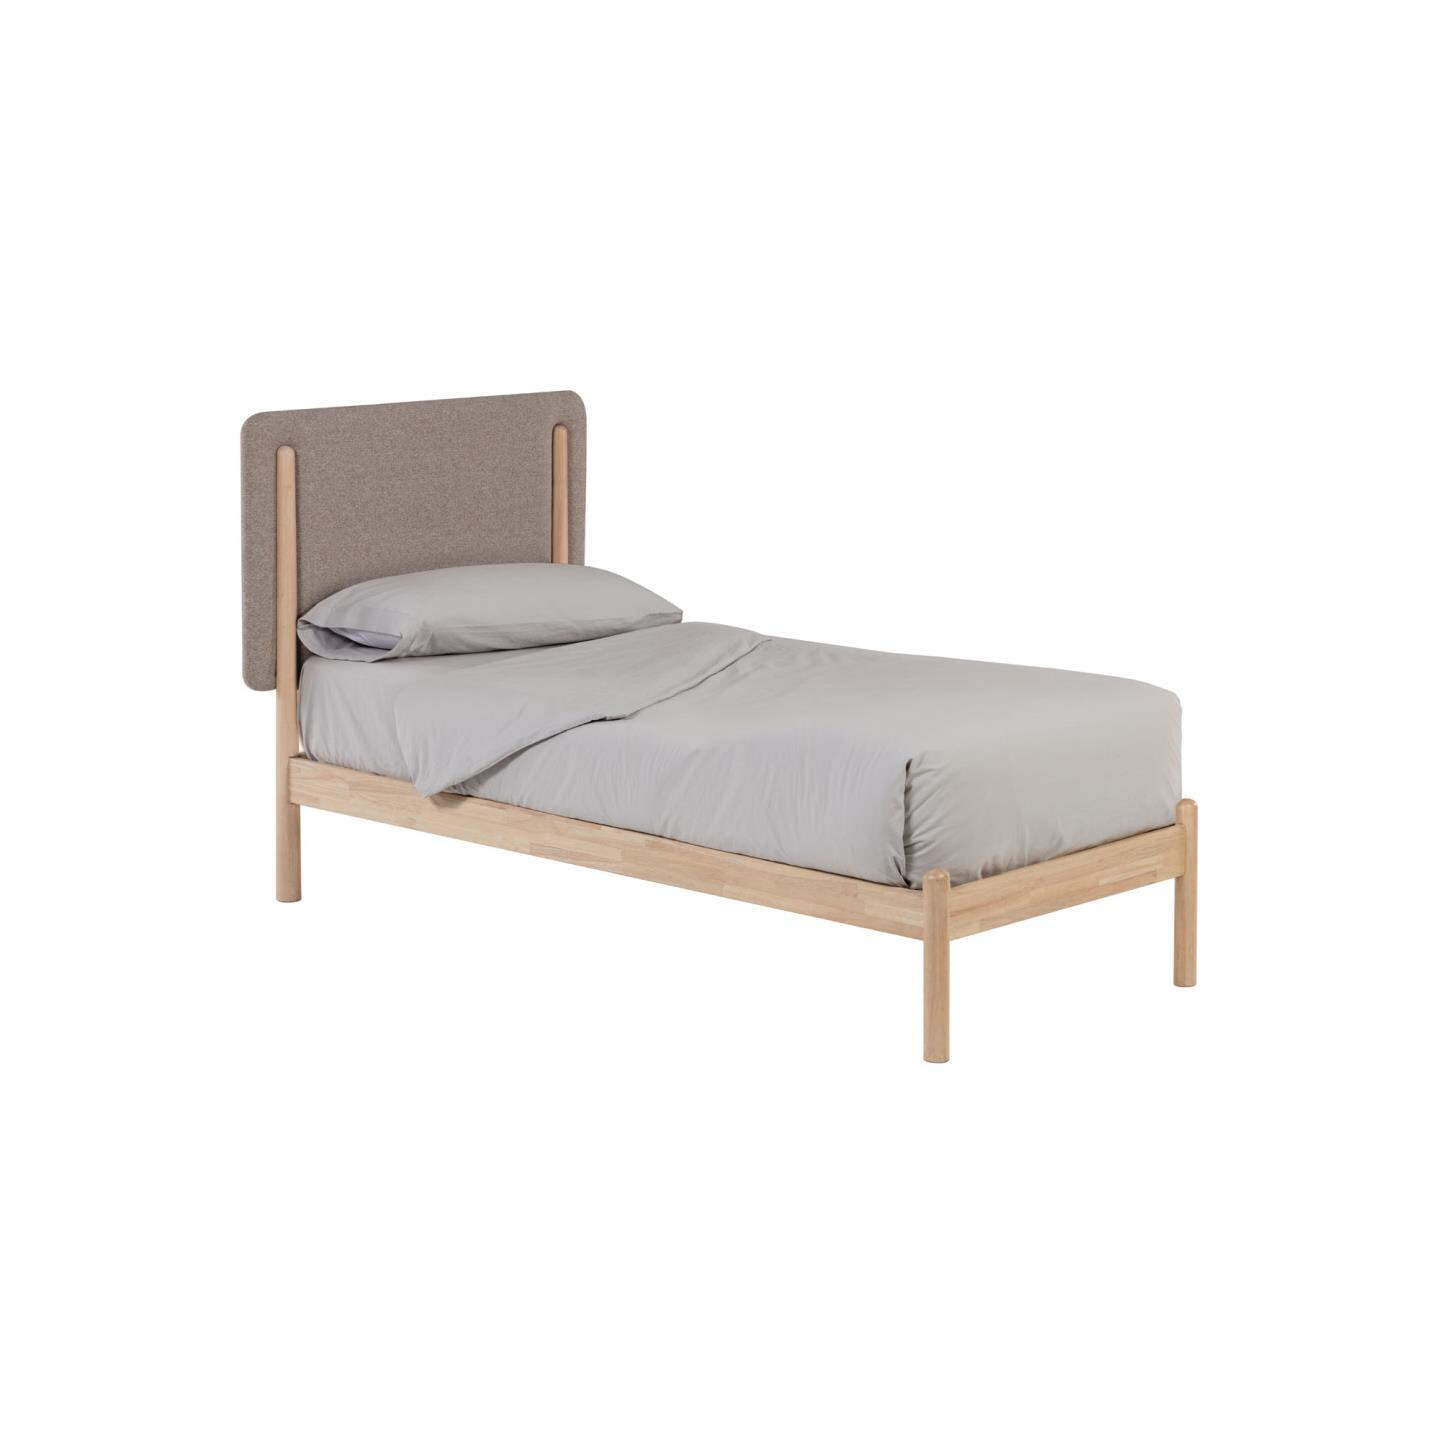 Kave Home Bed 'Shayndel' Rubberhout, 90 x 190cm